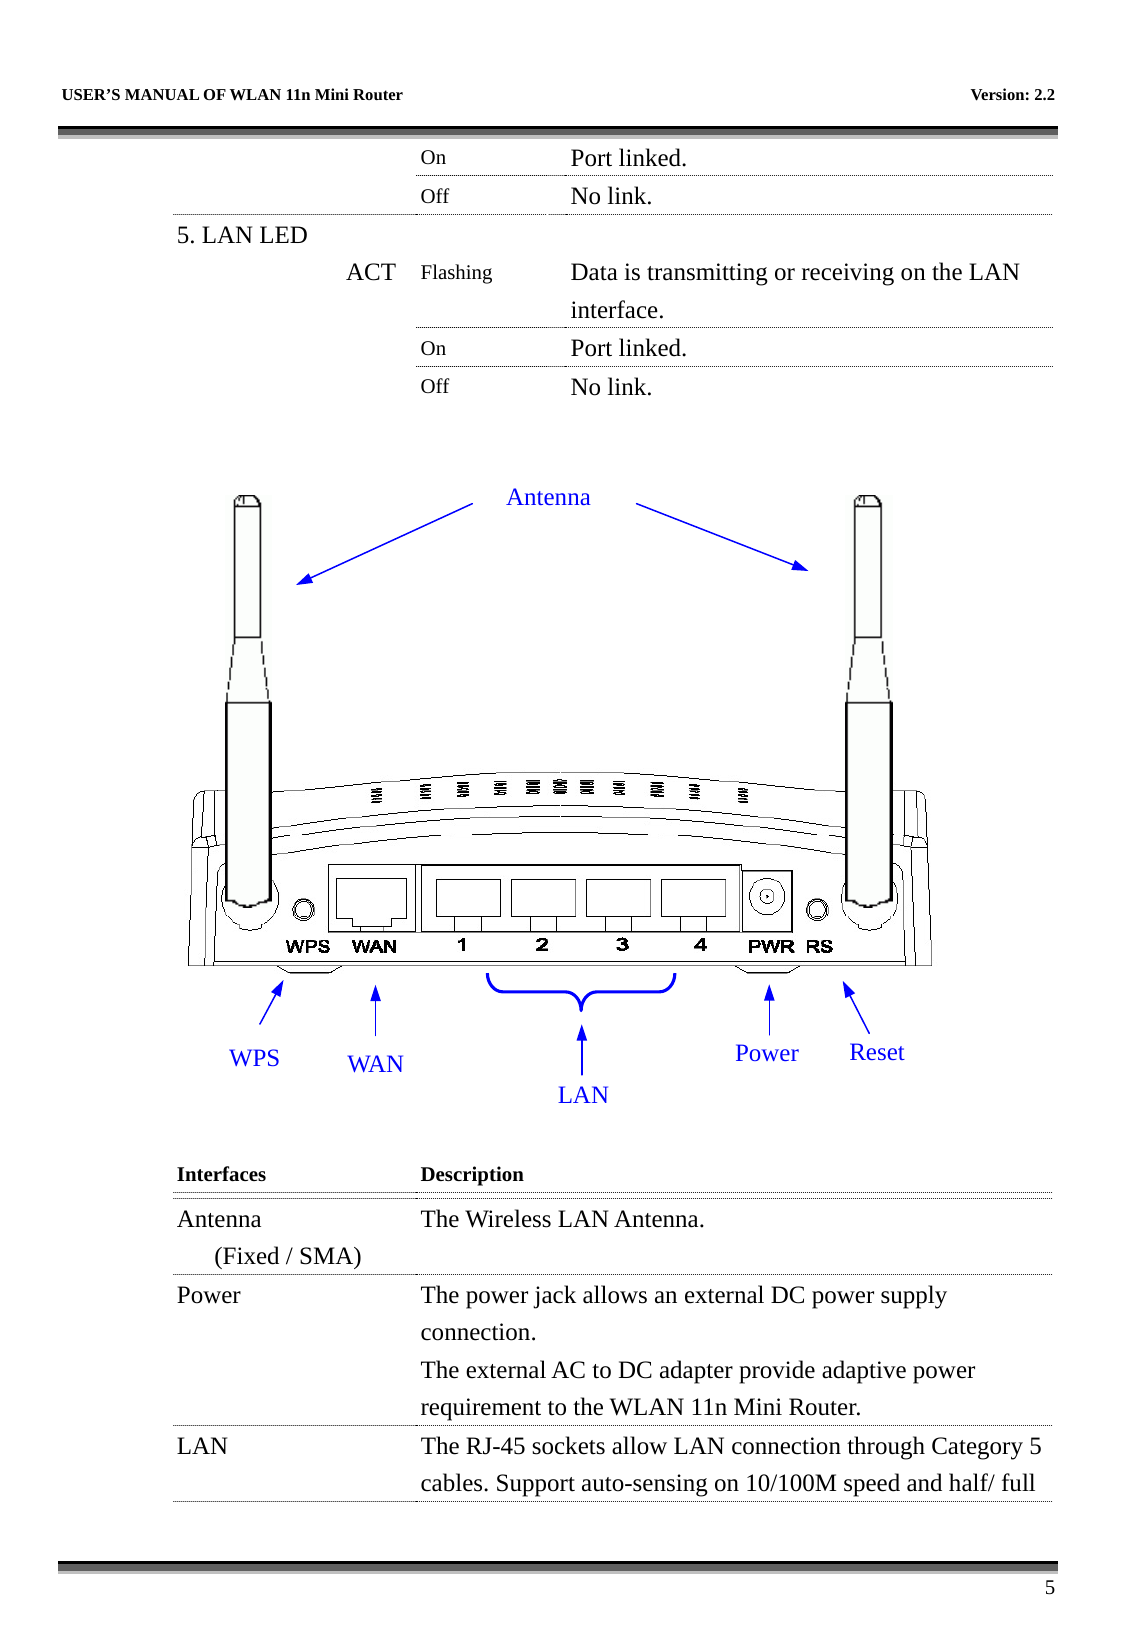   USER’S MANUAL OF WLAN 11n Mini Router    Version: 2.2      5   On  Port linked.   Off  No link. 5. LAN LED      ACT  Flashing  Data is transmitting or receiving on the LAN interface.   On  Port linked.    Off  No link.       Interfaces  Description Antenna (Fixed / SMA)  The Wireless LAN Antenna.  Power    The power jack allows an external DC power supply connection.  The external AC to DC adapter provide adaptive power requirement to the WLAN 11n Mini Router. LAN    The RJ-45 sockets allow LAN connection through Category 5 cables. Support auto-sensing on 10/100M speed and half/ full AntennaWAN  LANPowerReset WPS 